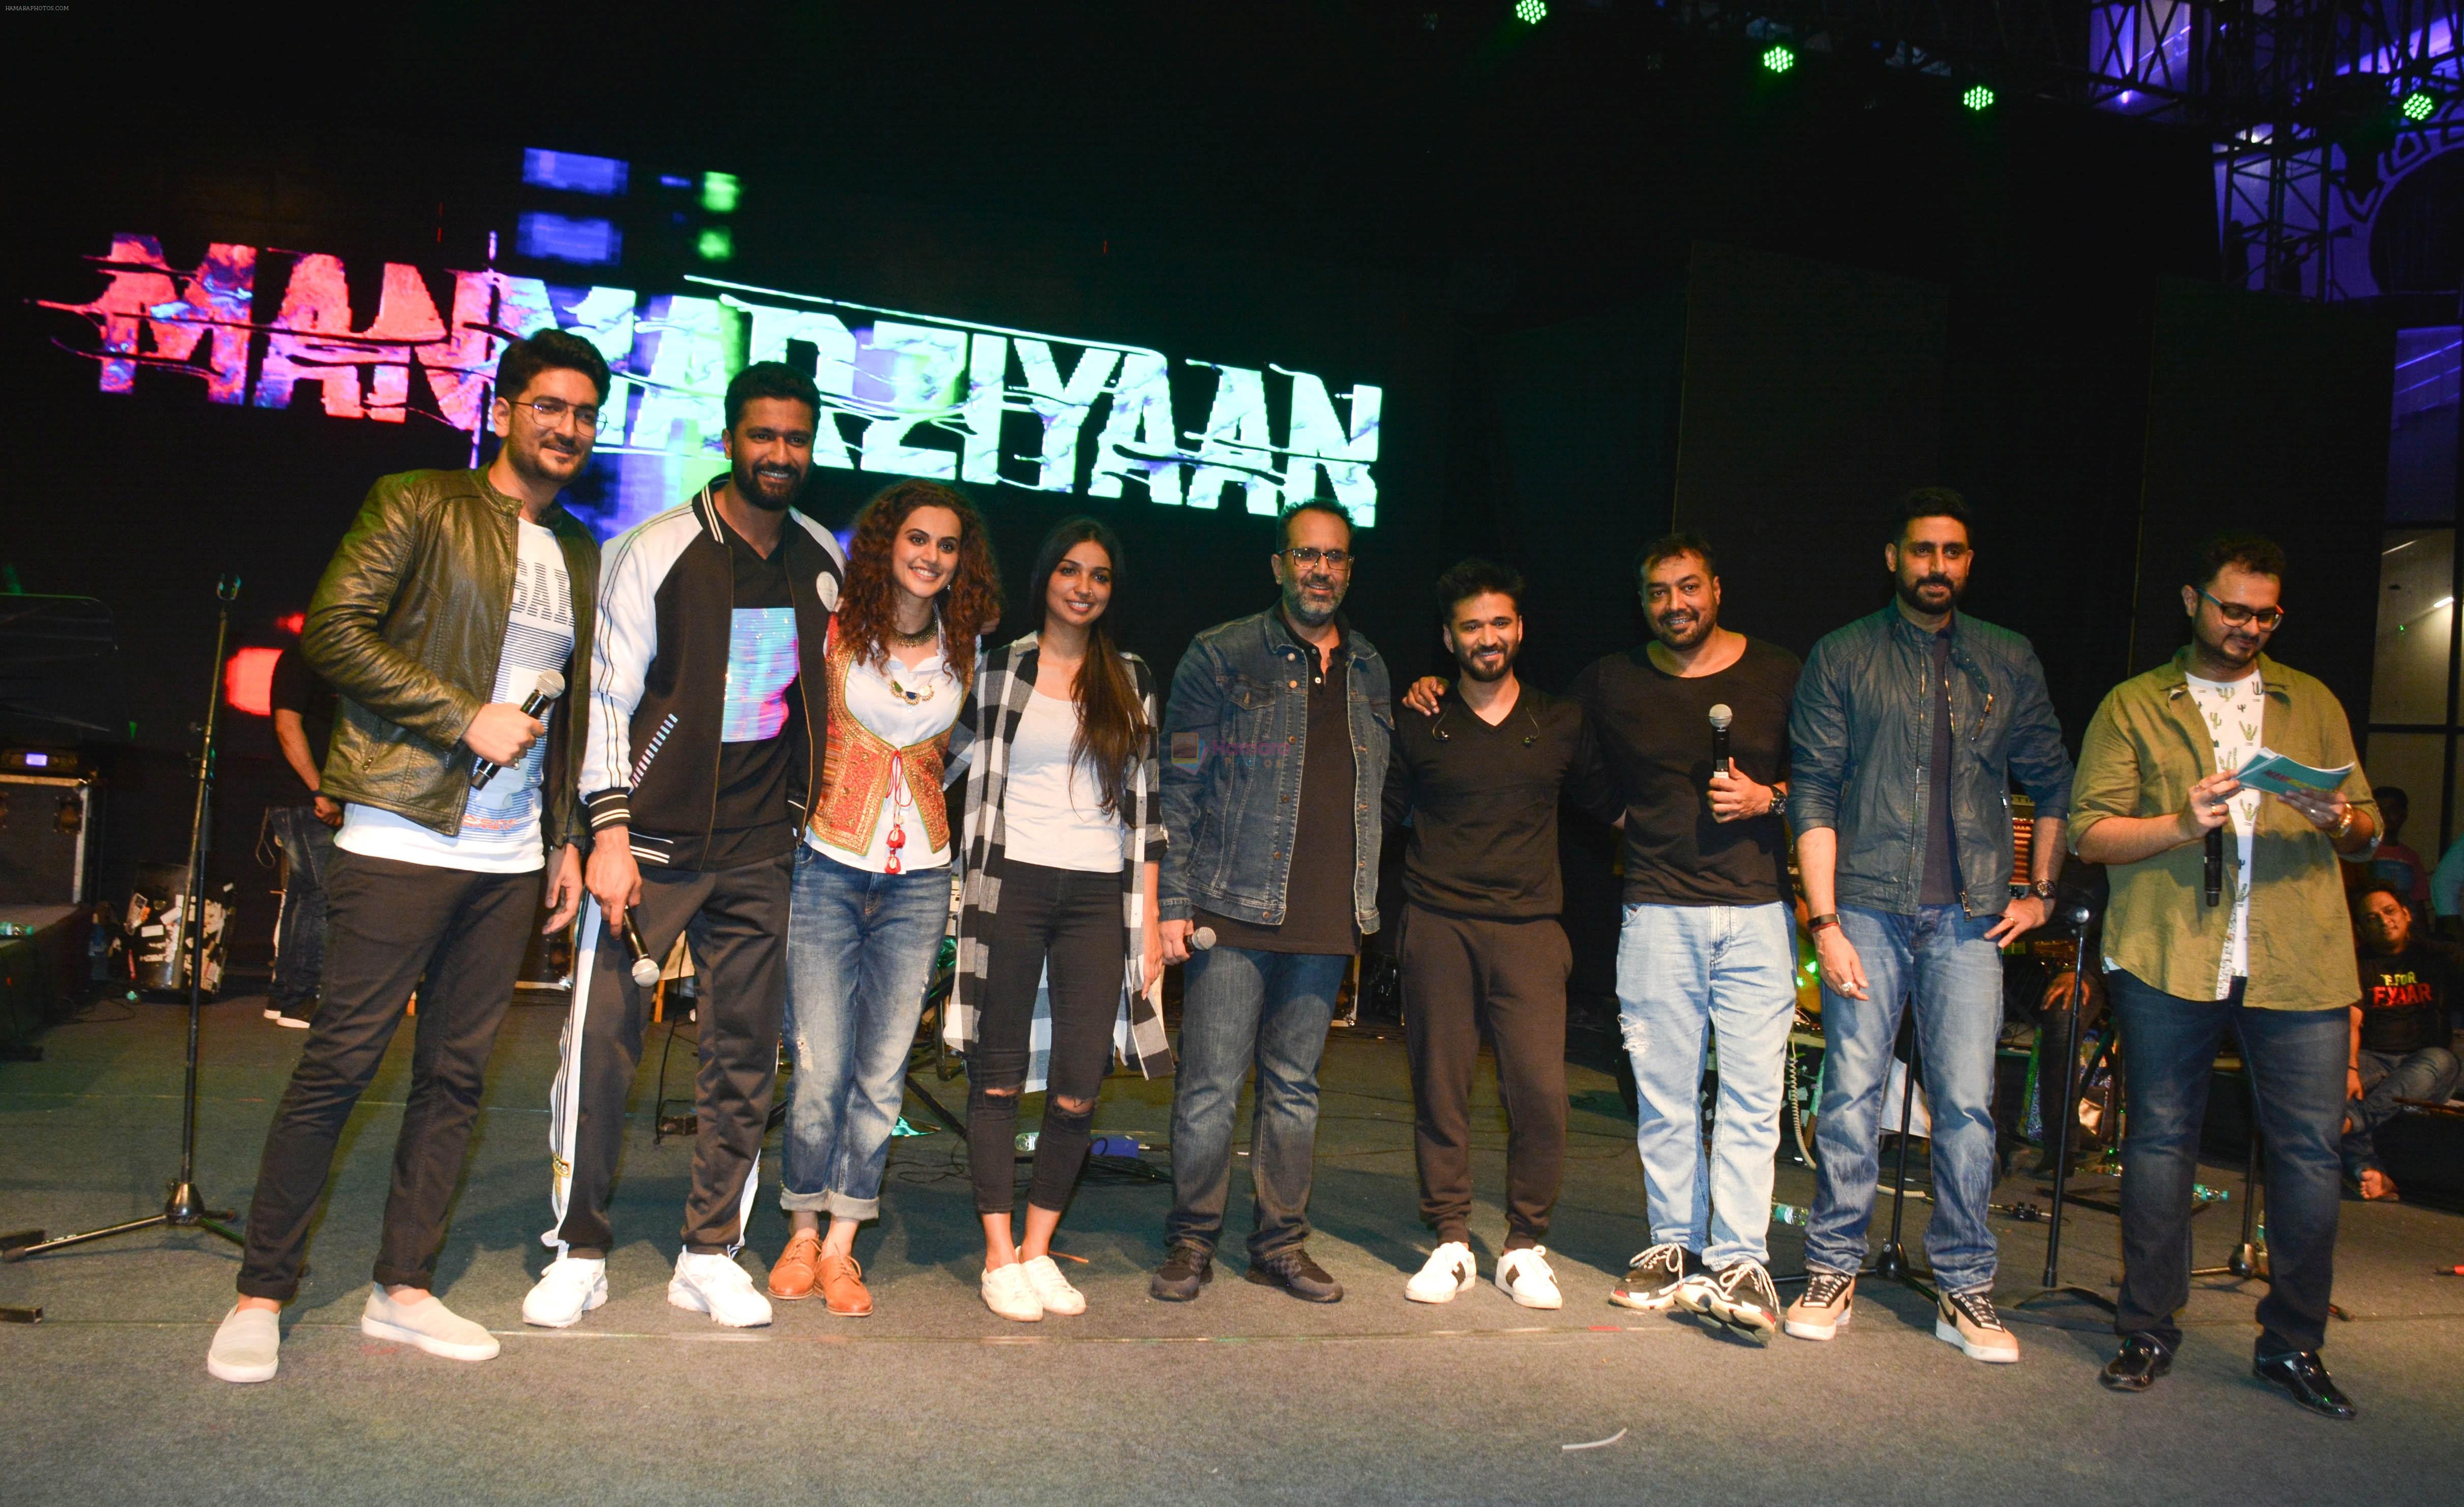 Vicky Kaushal at Manmarziyaan Music Concert in NM College In Juhu on 19th Aug 2018